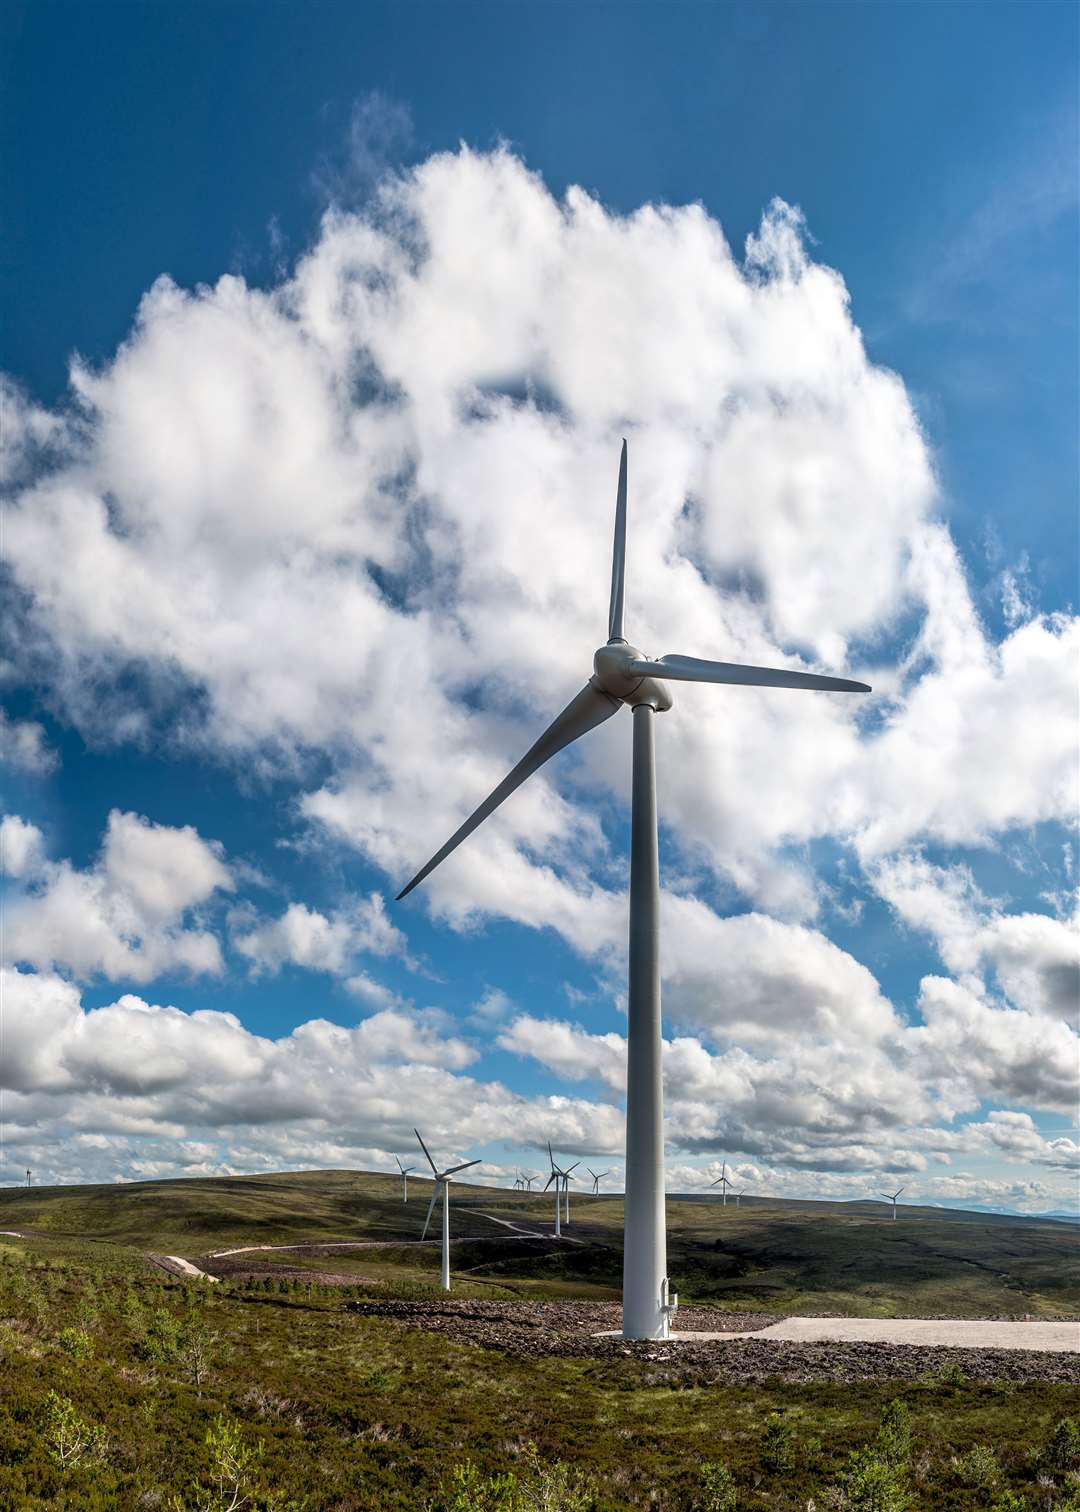 Existing turbines at the site.